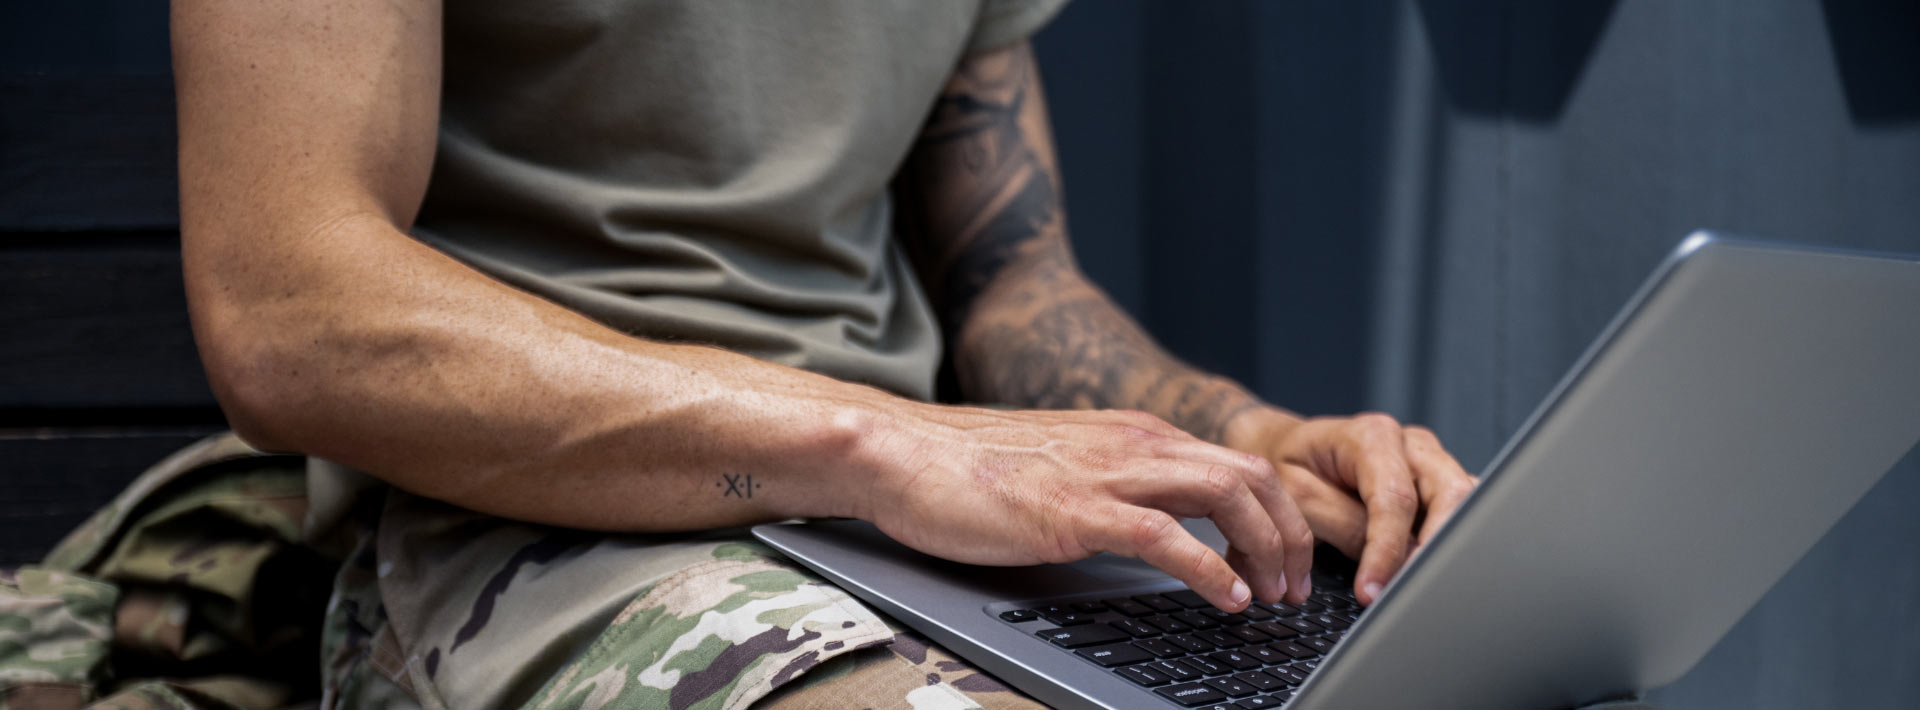 A man in a military uniform works with a laptop in his lap